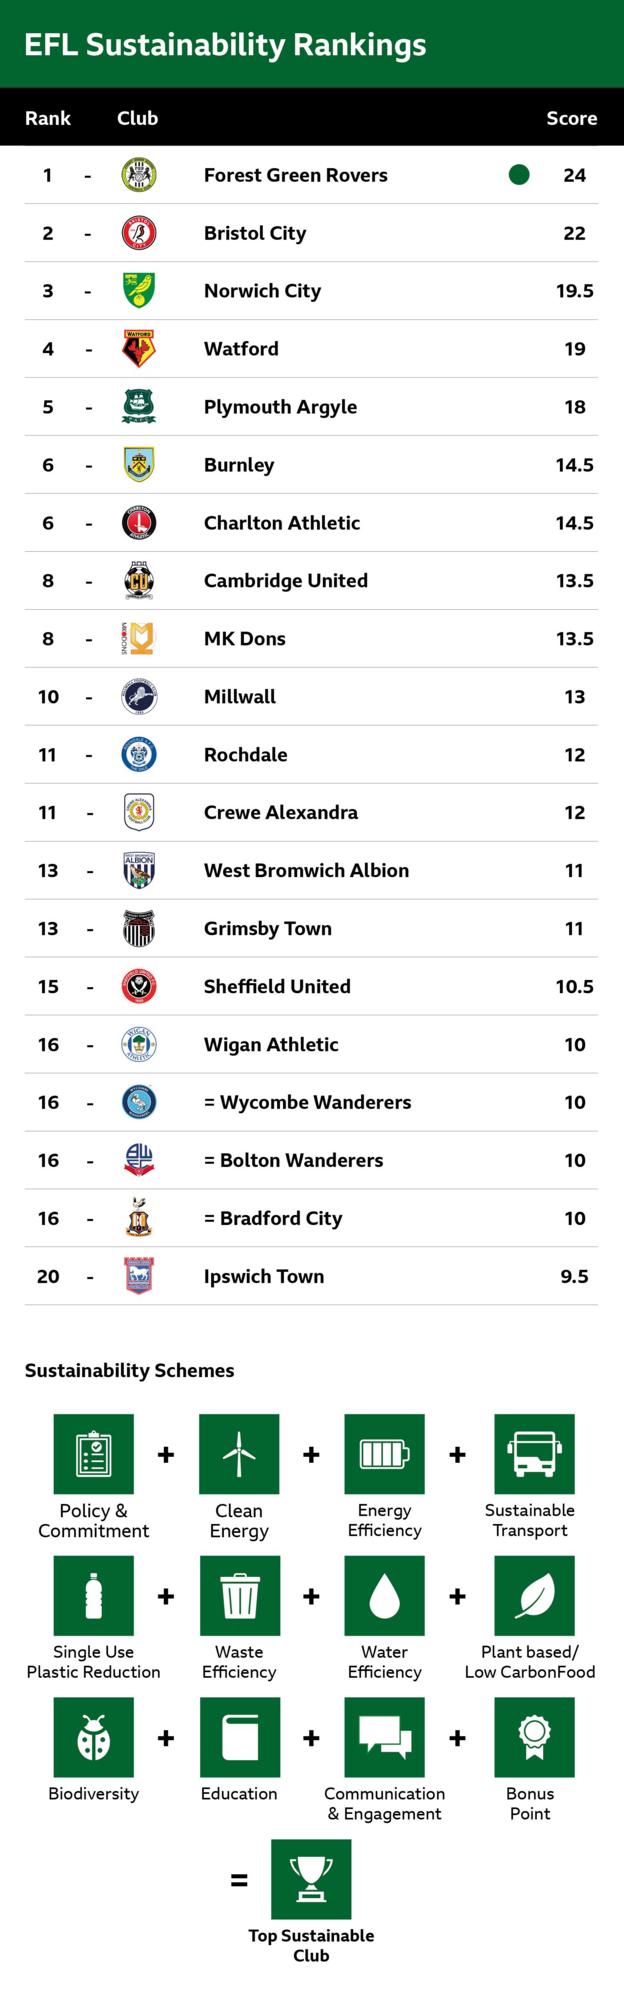 A table showing the top 20 EFL clubs based on their sustainability rankings